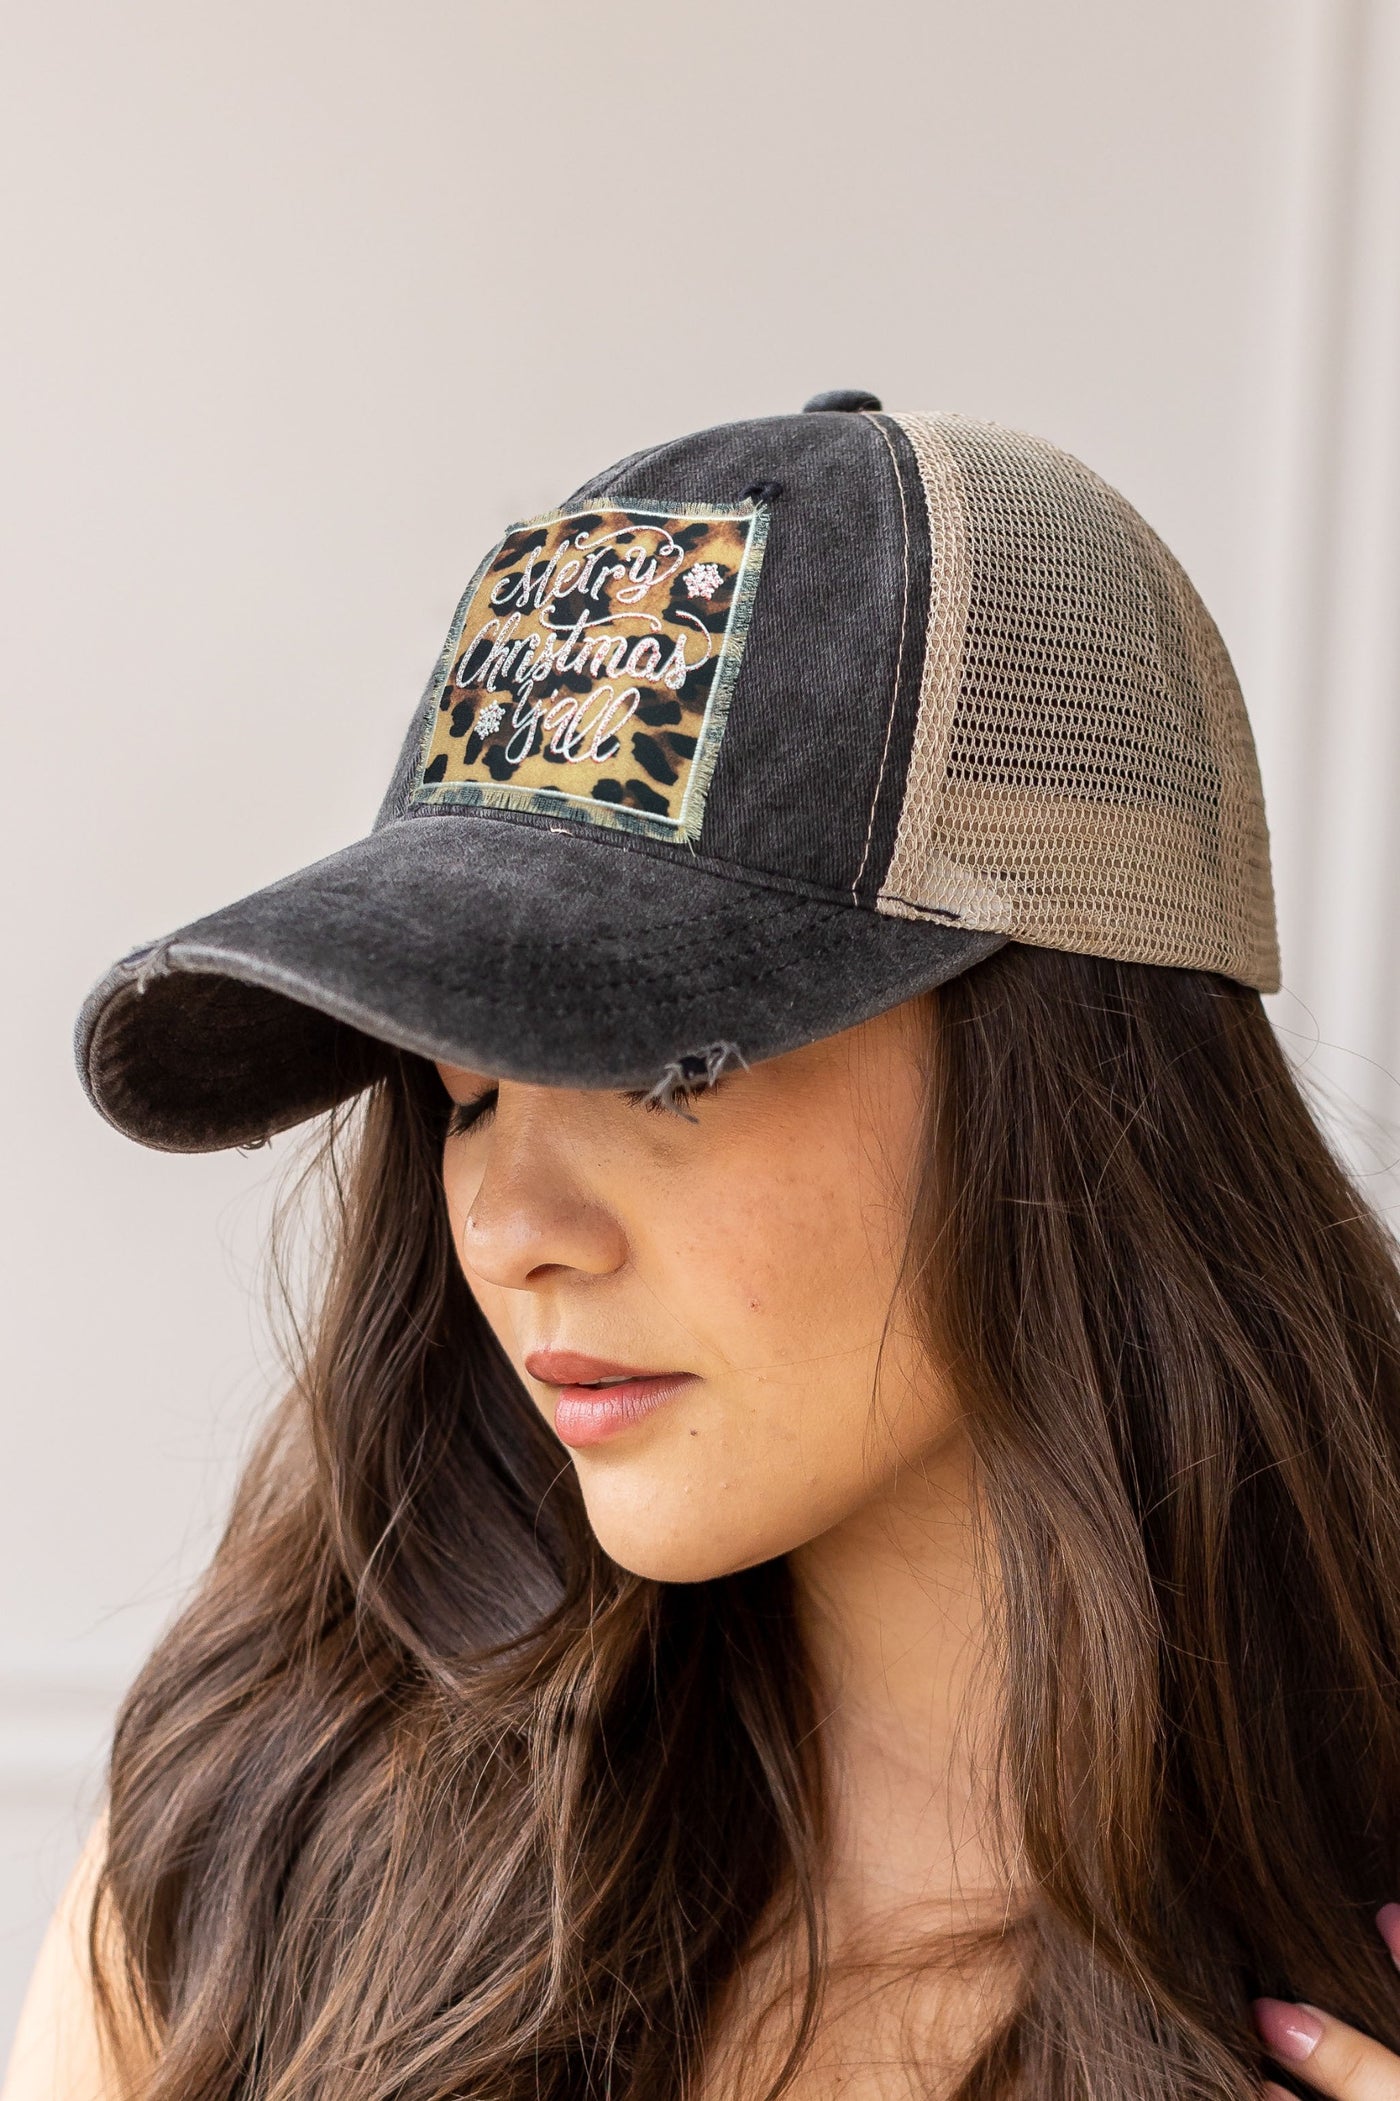 Leopard Merry Christmas Y'all Patch on High Ponytail Charcoal Hat with Beige Mesh